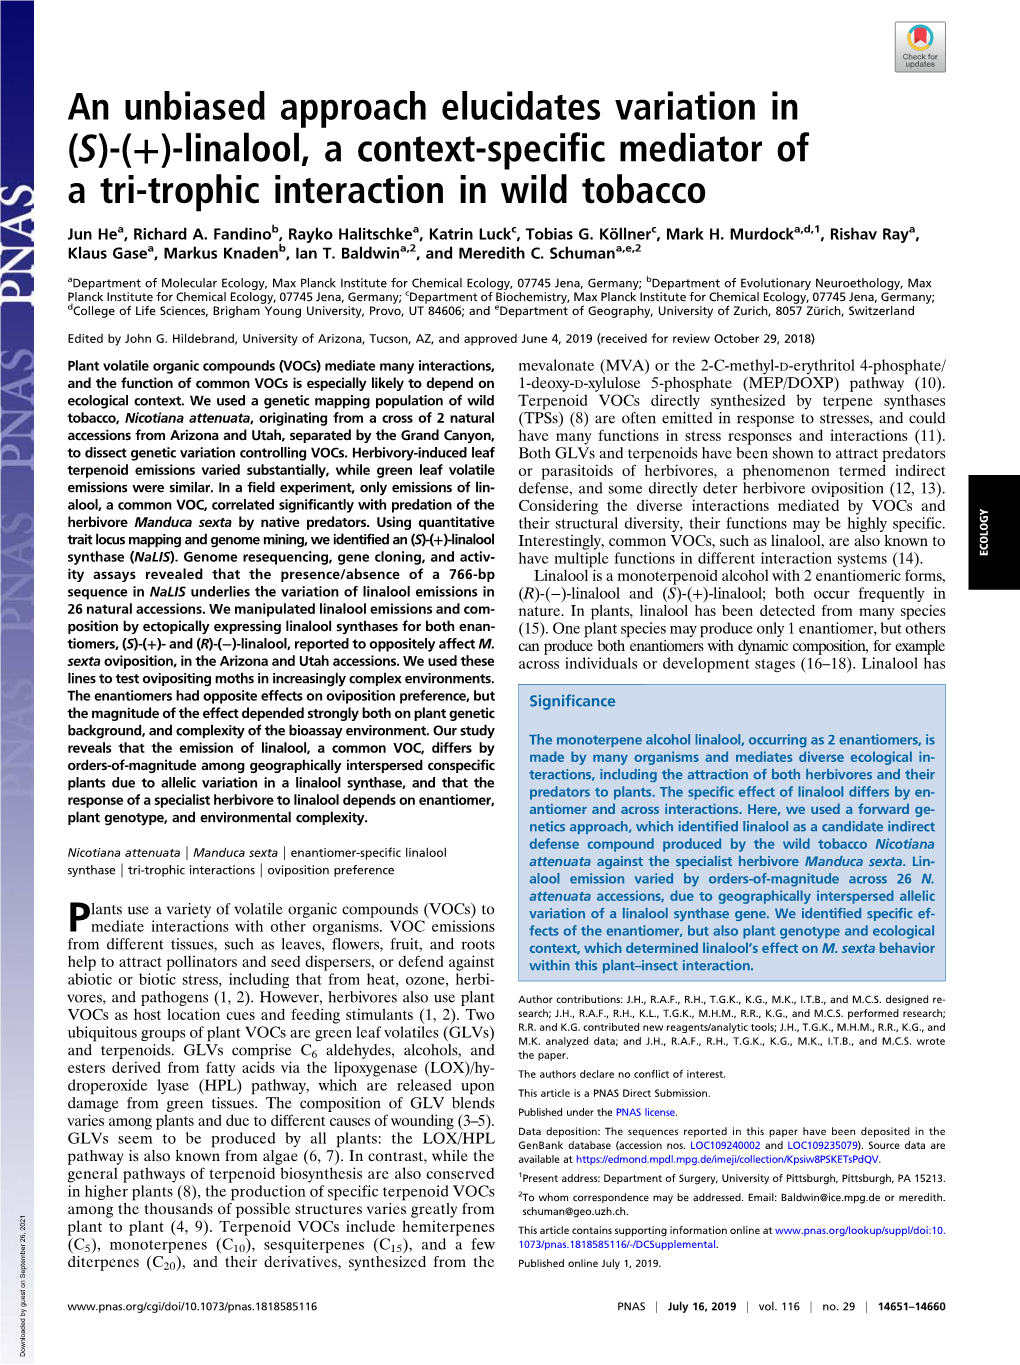 An Unbiased Approach Elucidates Variation in (S)-(+)-Linalool, a Context-Specific Mediator of a Tri-Trophic Interaction in Wild Tobacco